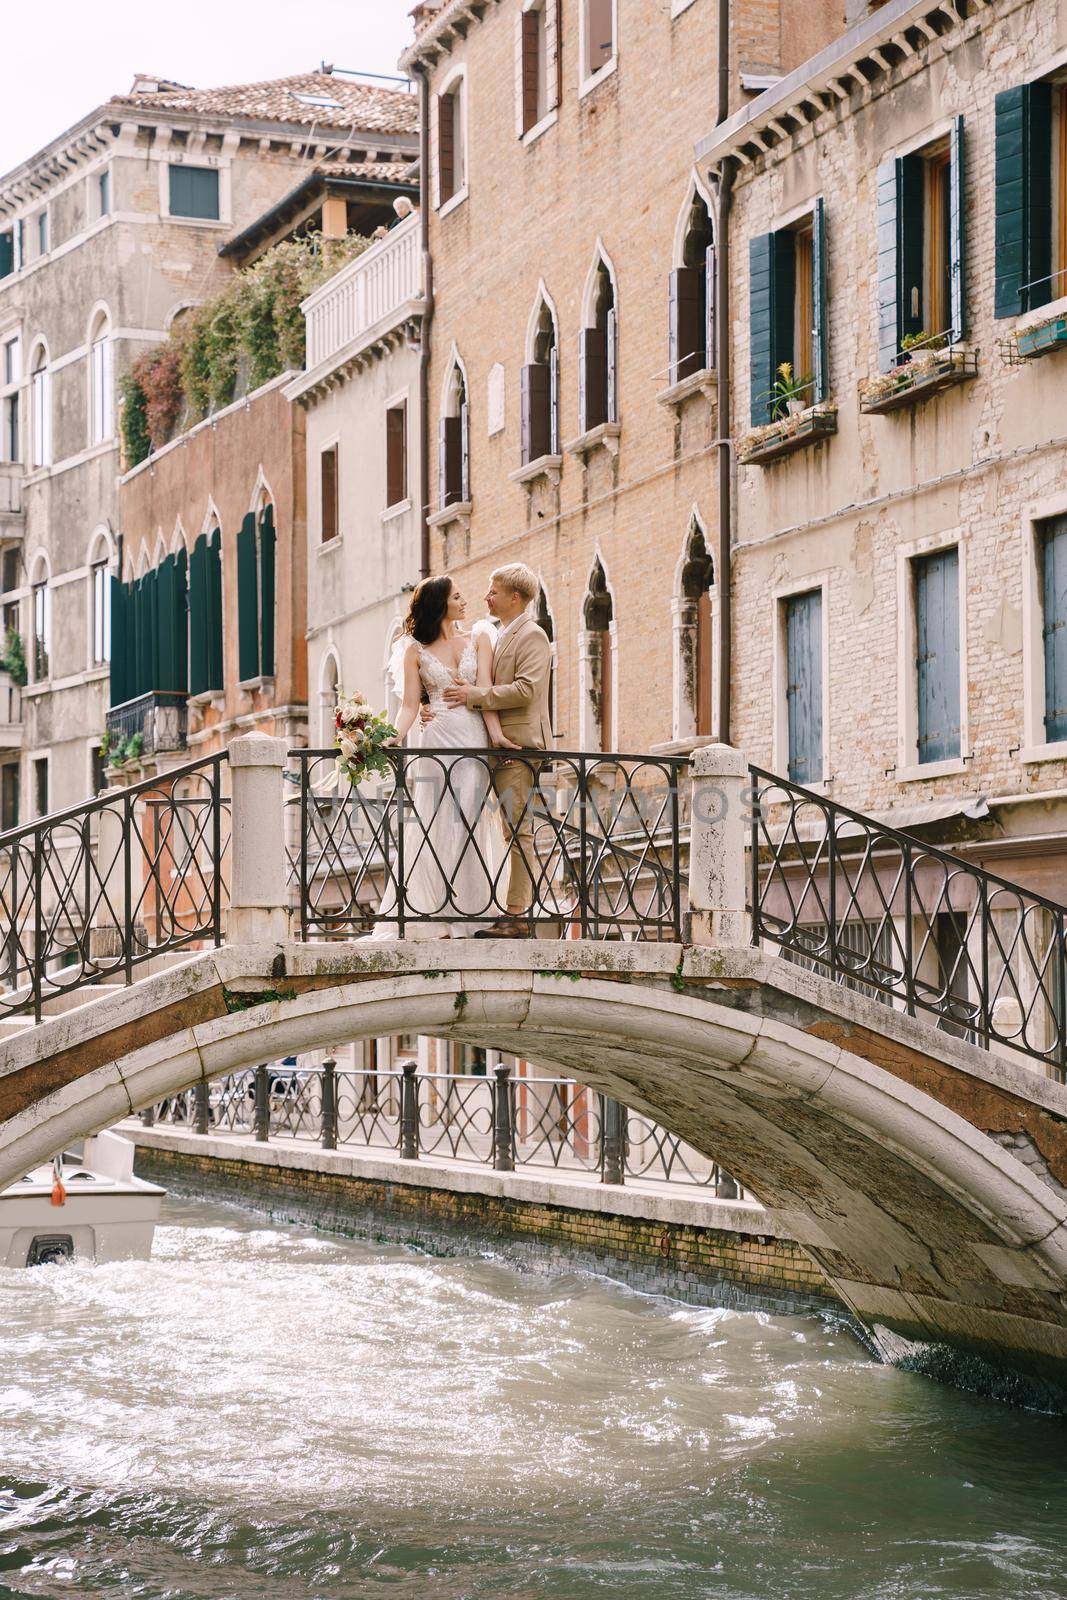 Italy wedding in Venice. The bride and groom are standing on a stone bridge over a narrow Venetian canal. Newlyweds walk around the city taking pictures on the street. by Nadtochiy